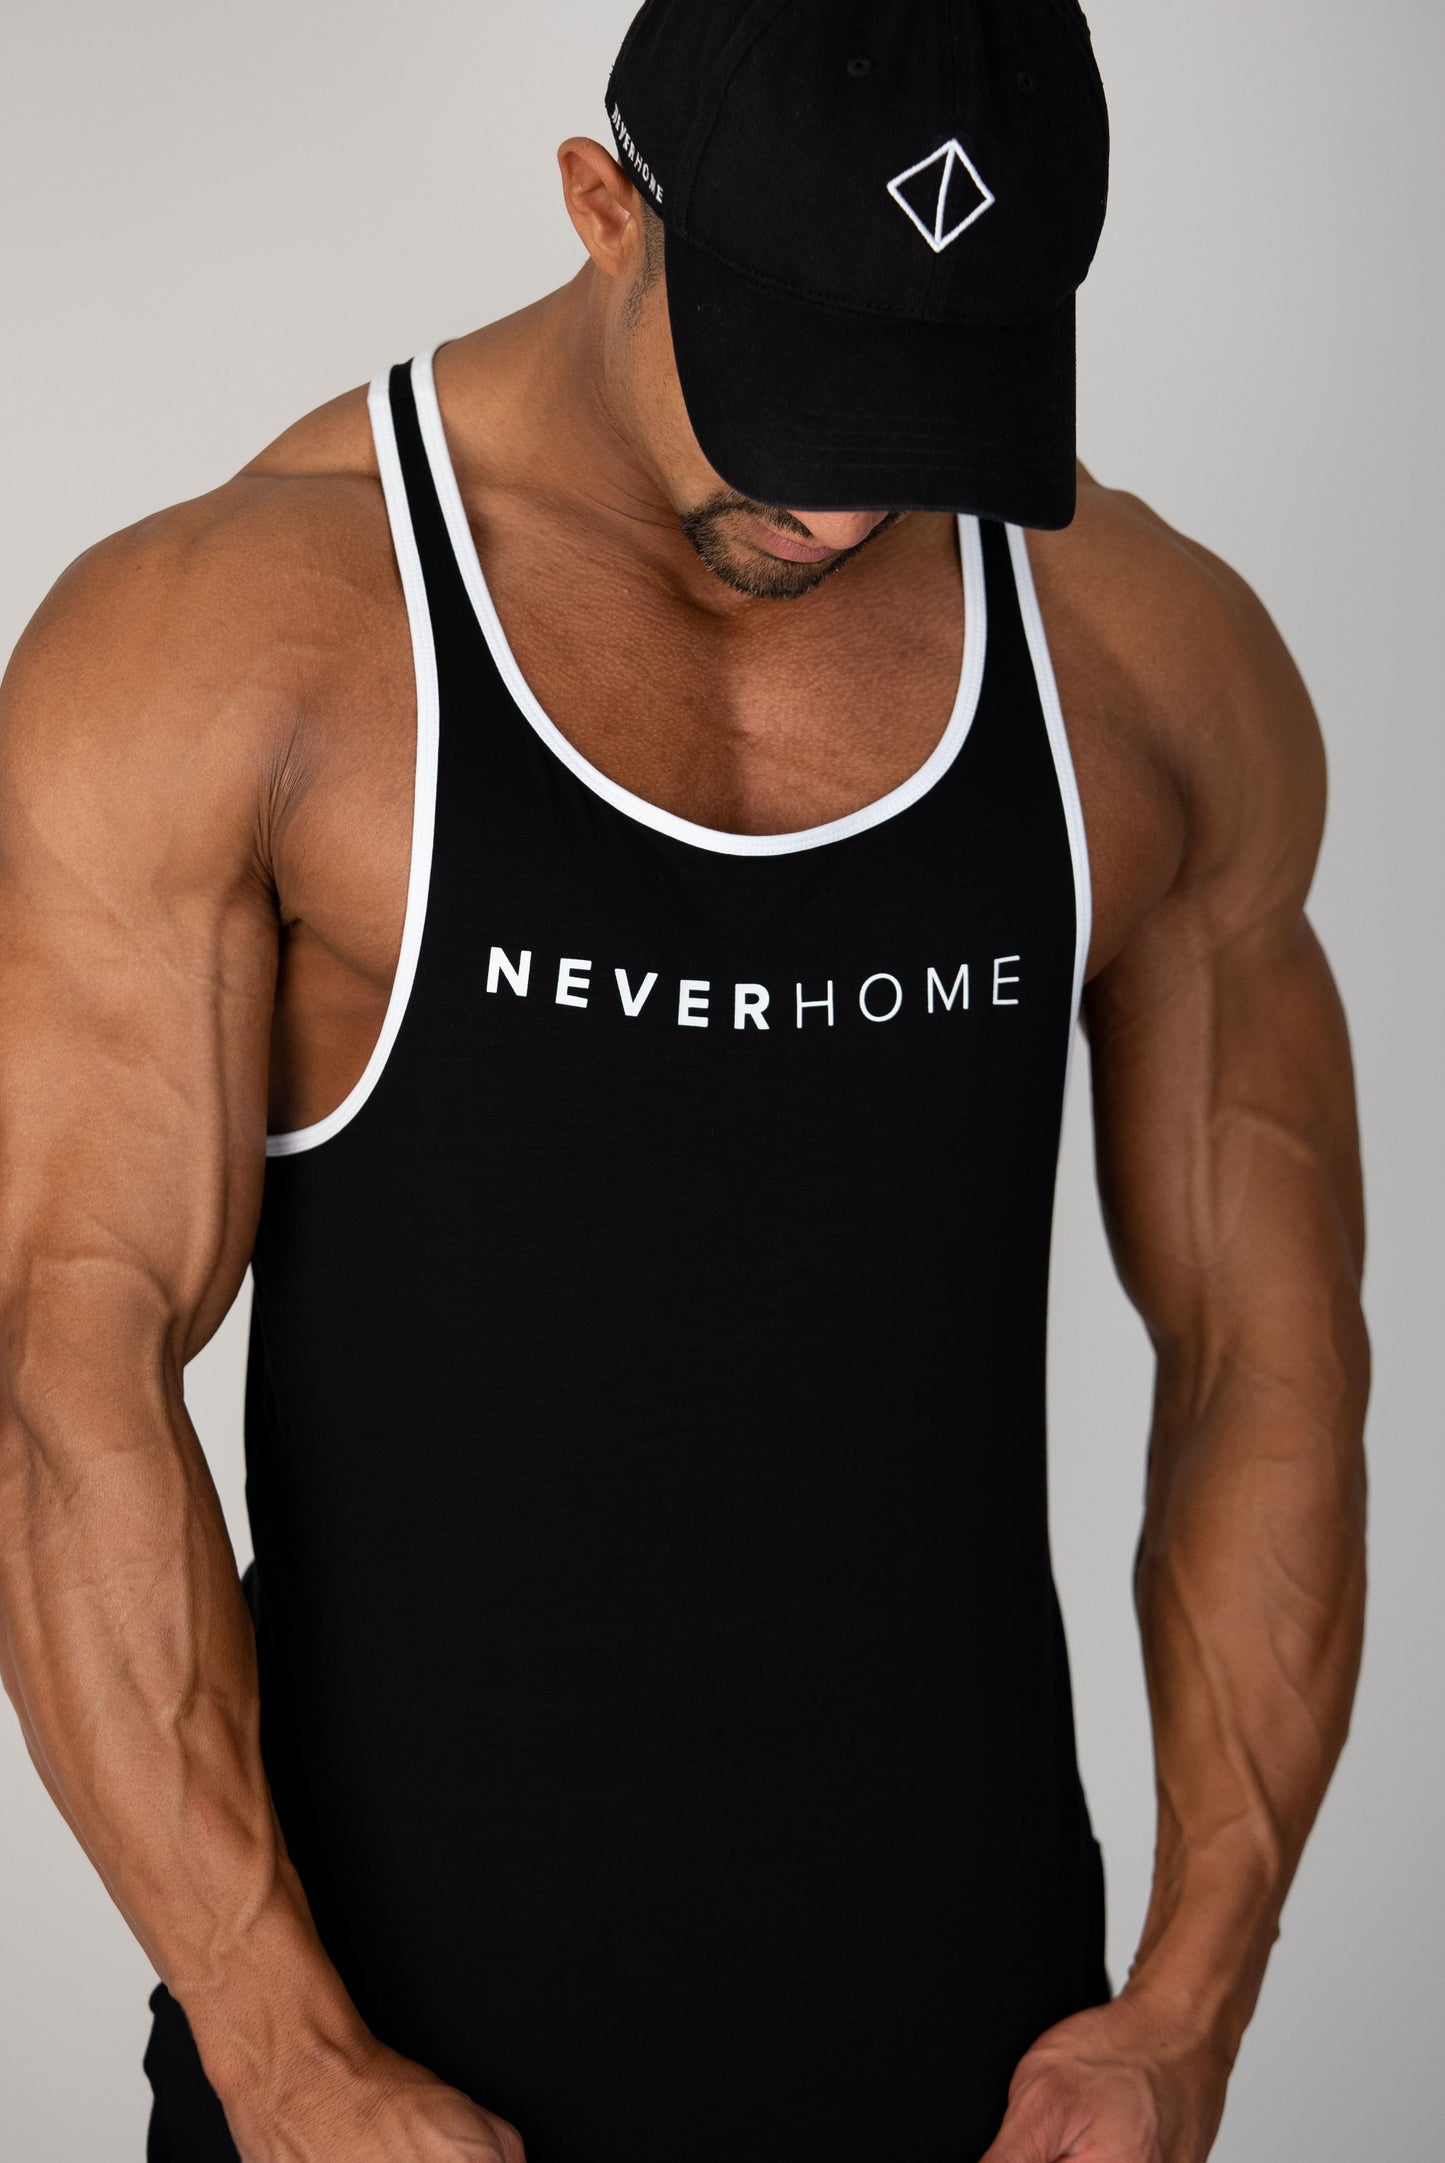 THE ULTIMATE PIPED BLACK AND WHITE STRINGER